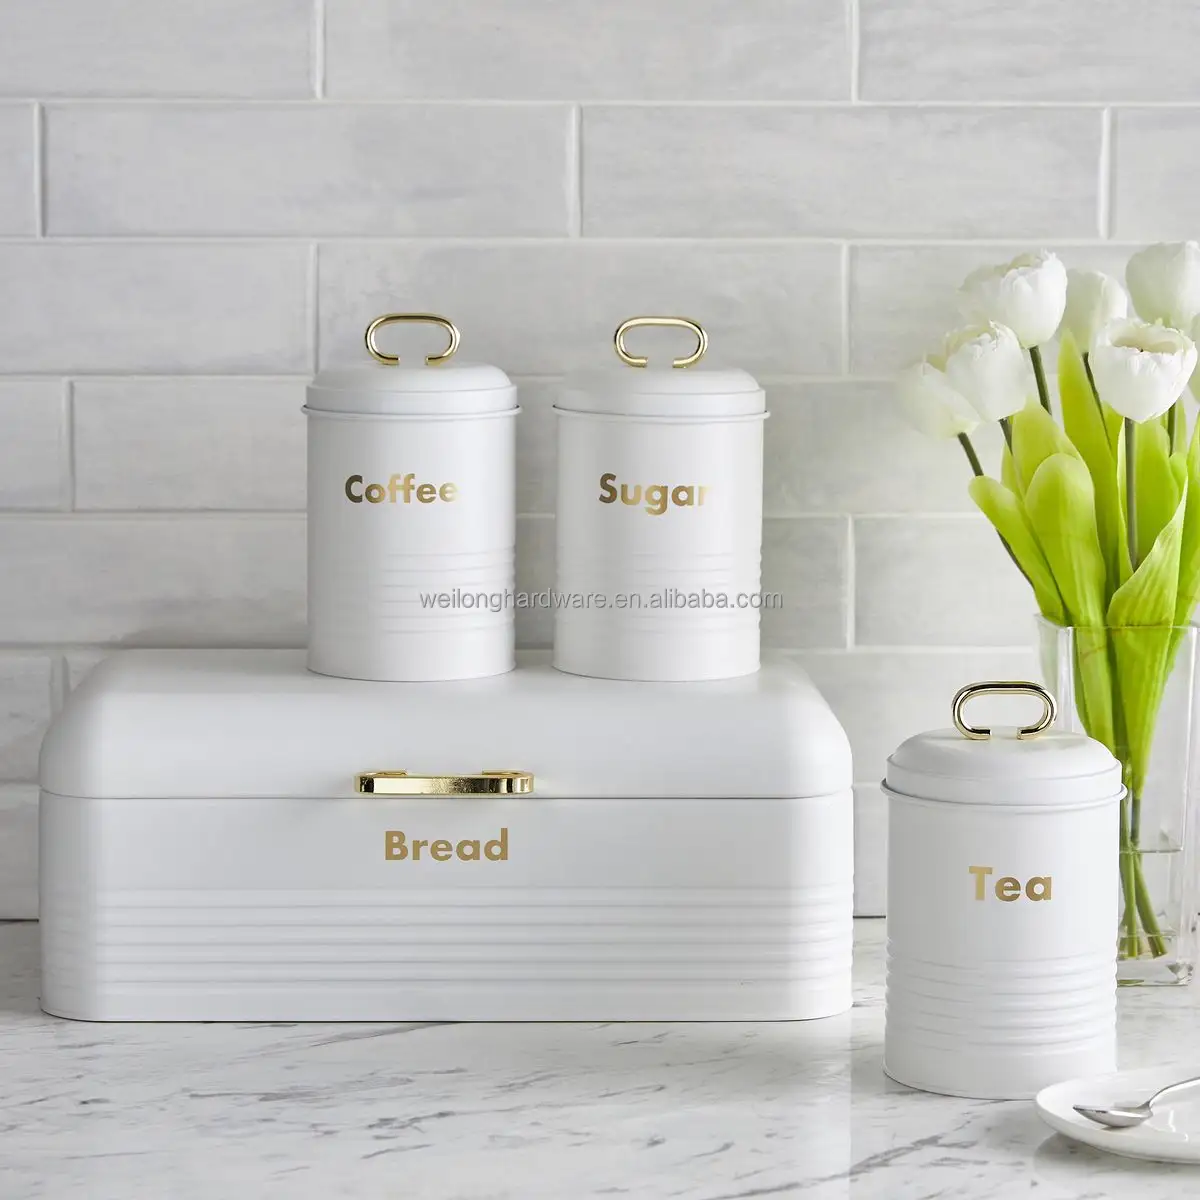 Metal Home Kitchen Bread Box Tea Sugar Coffee Jar Storage Canister Set With Lid Golden Handle Storage Container